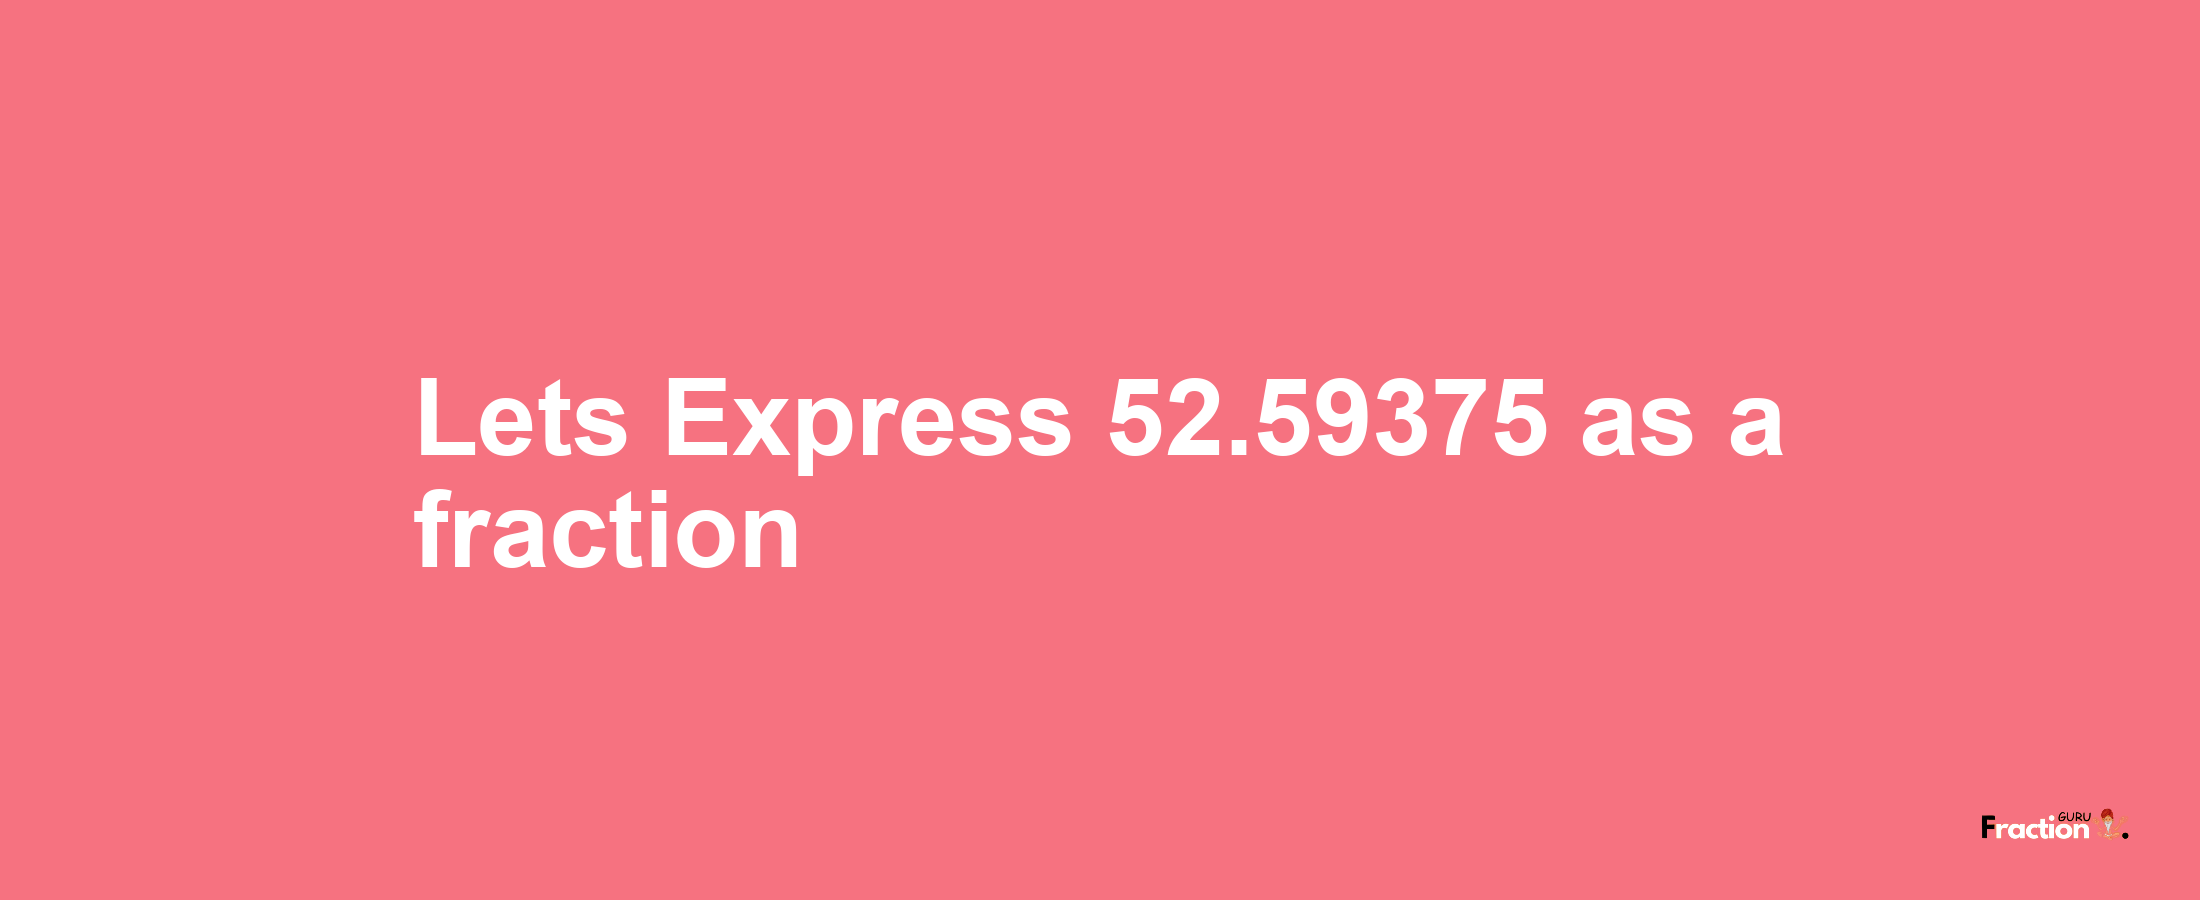 Lets Express 52.59375 as afraction